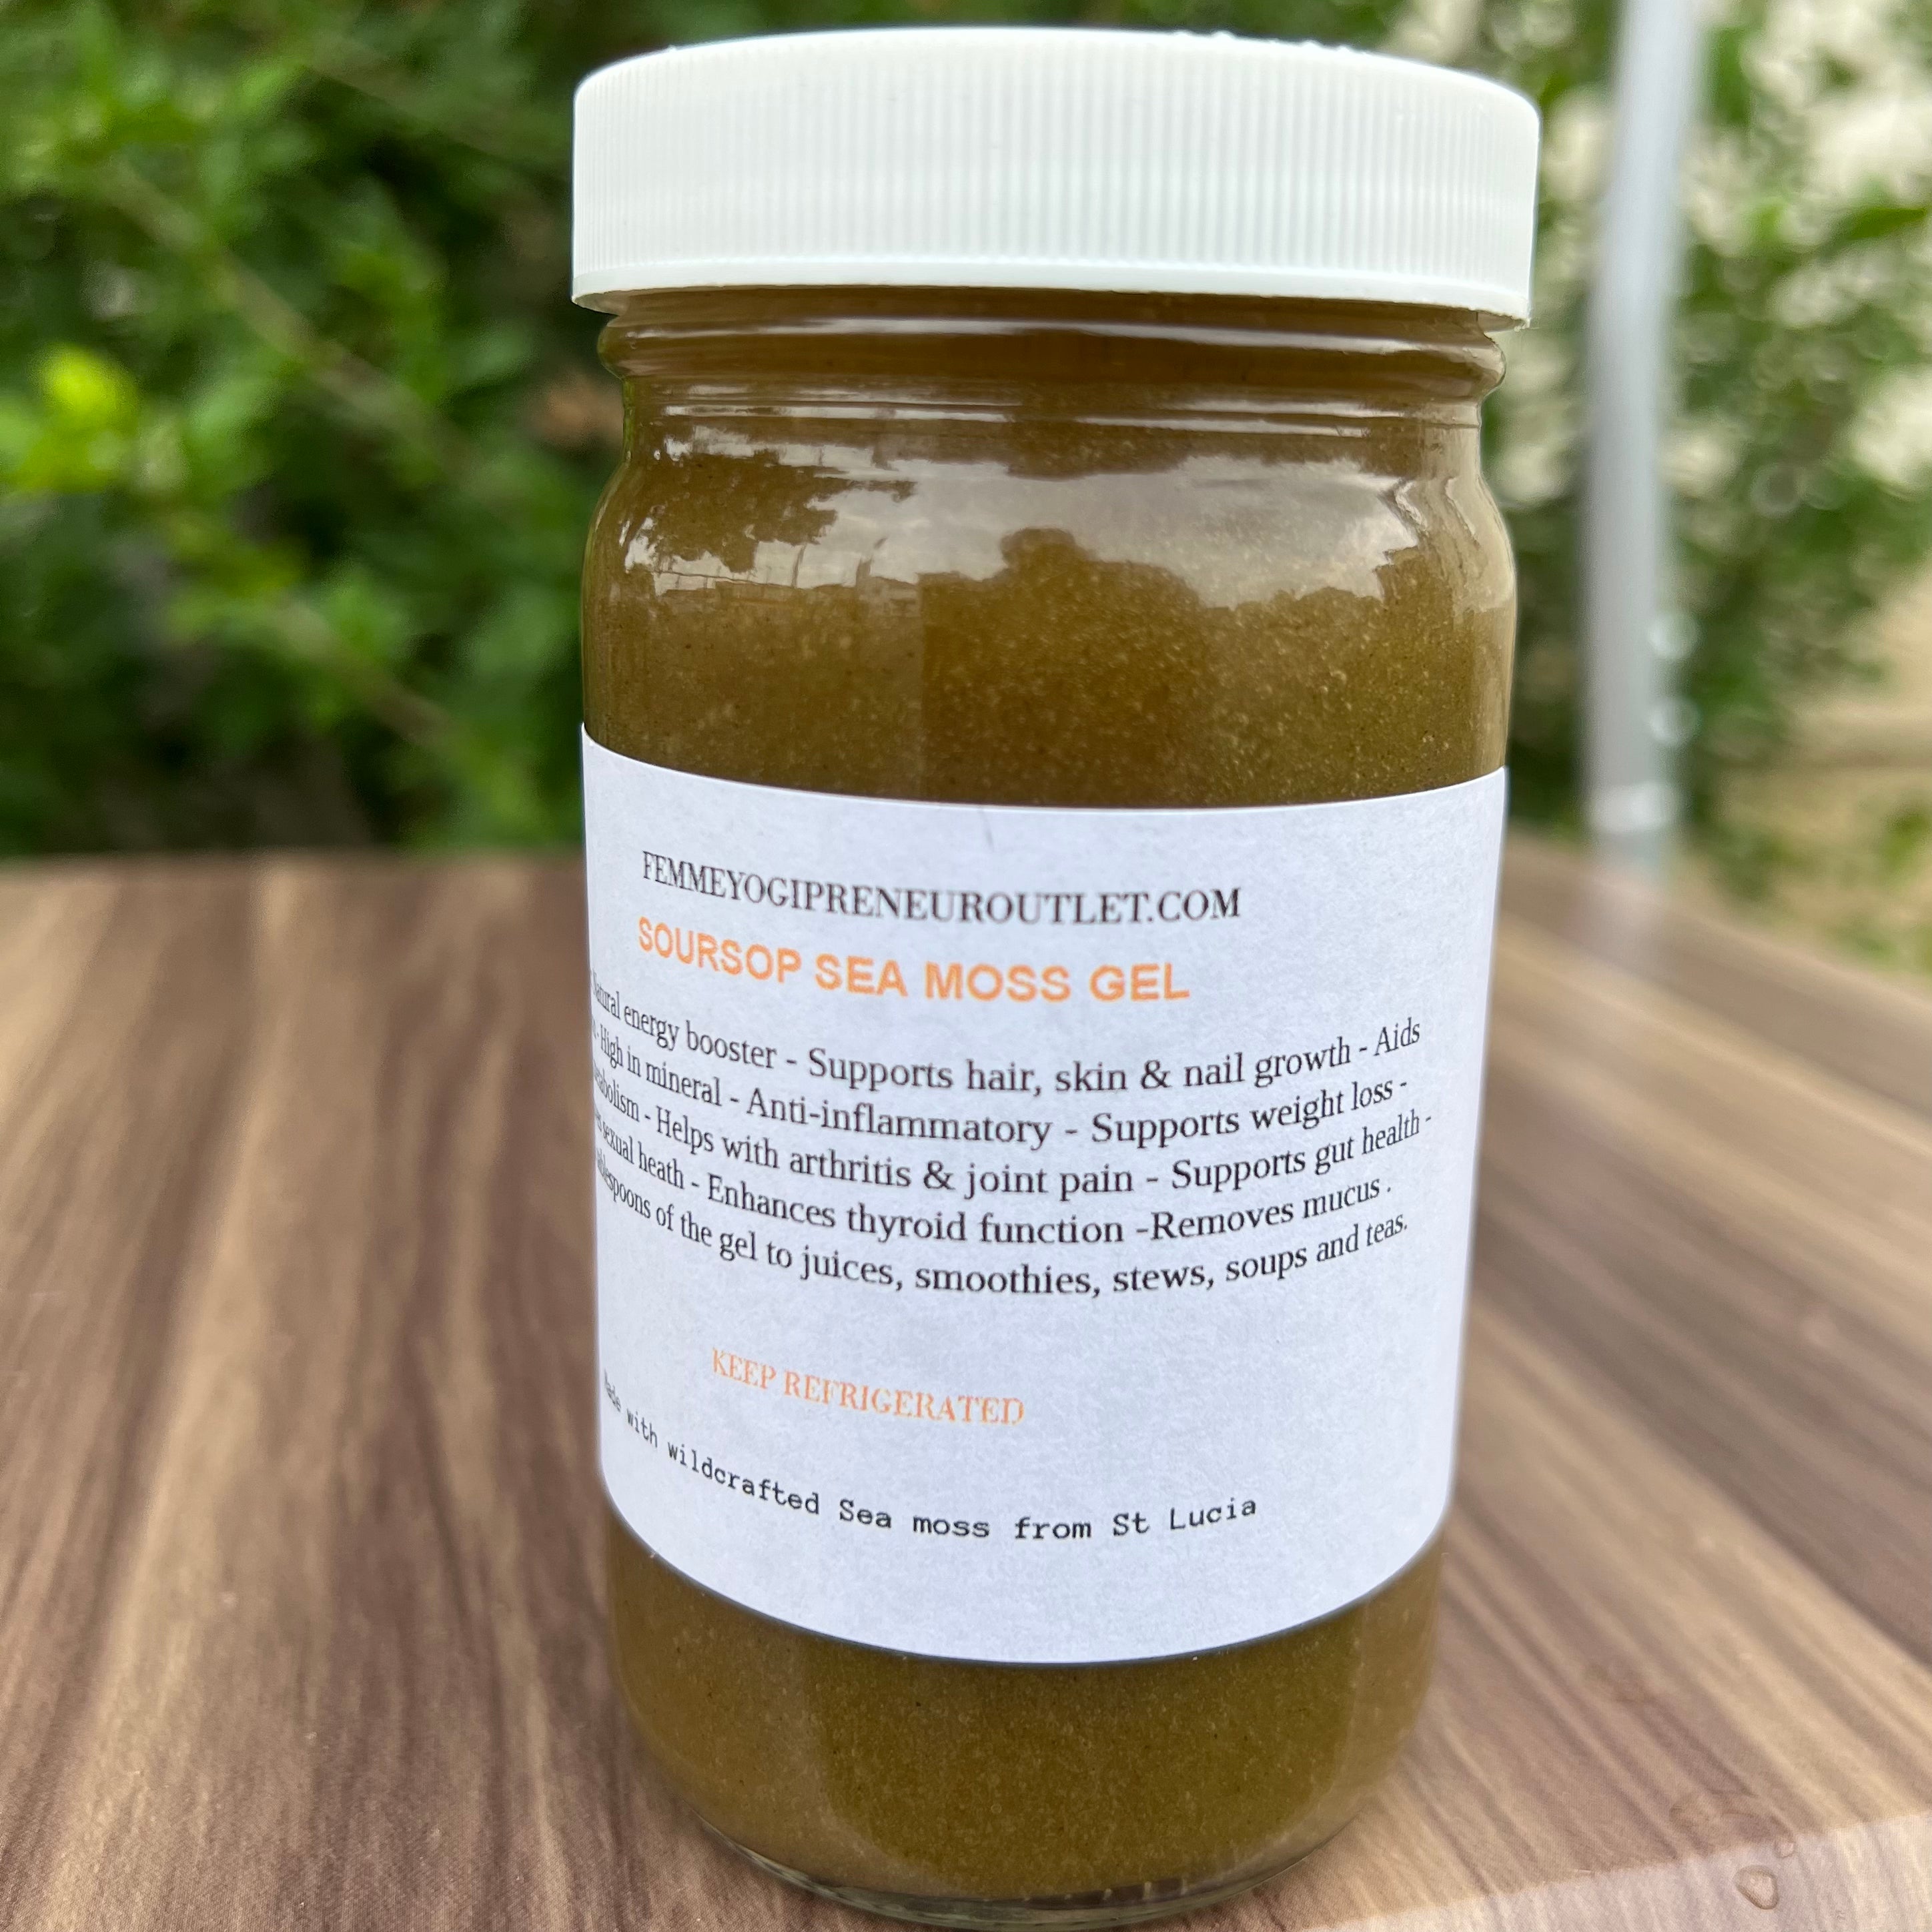 Soursop Sea Moss Gel - Made with Soursop Leaf